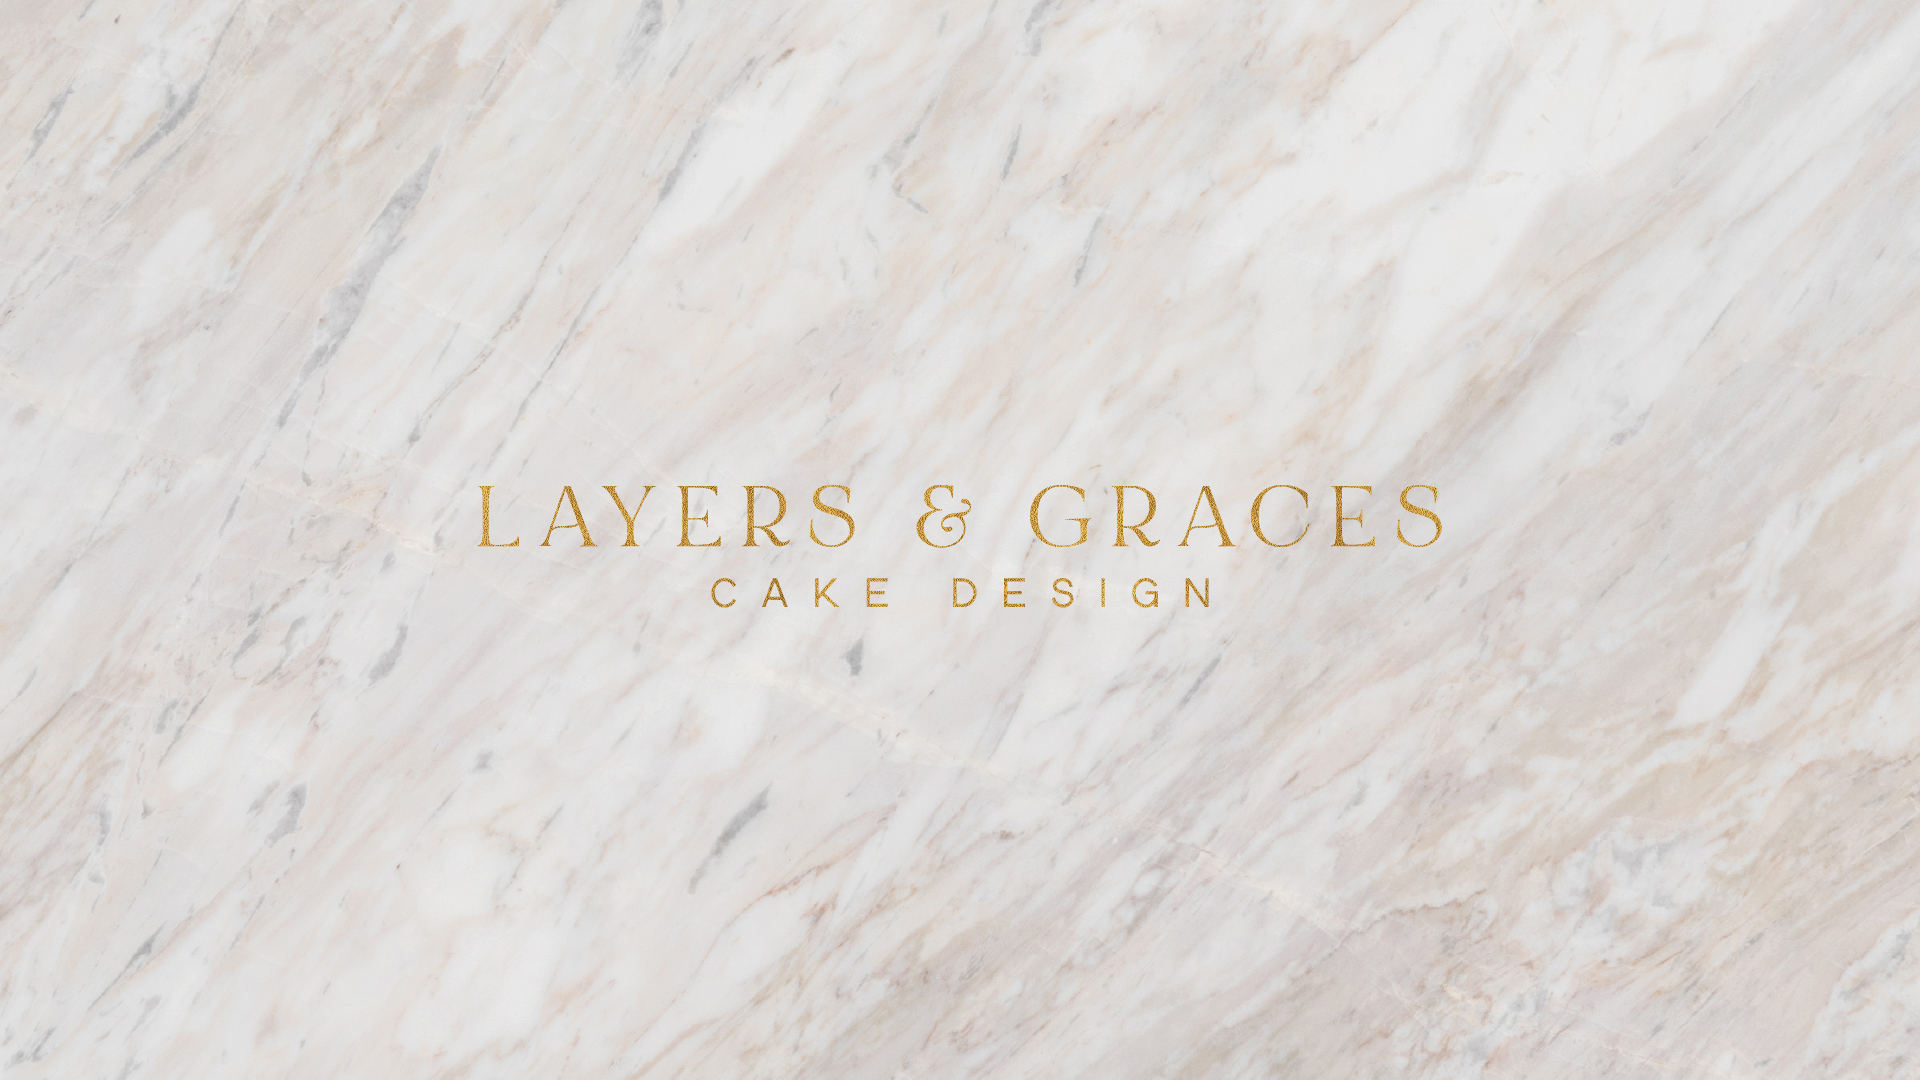 Luxury marble gold foil brand identity logo design Layers and Graces cake design by Bailey and Roo